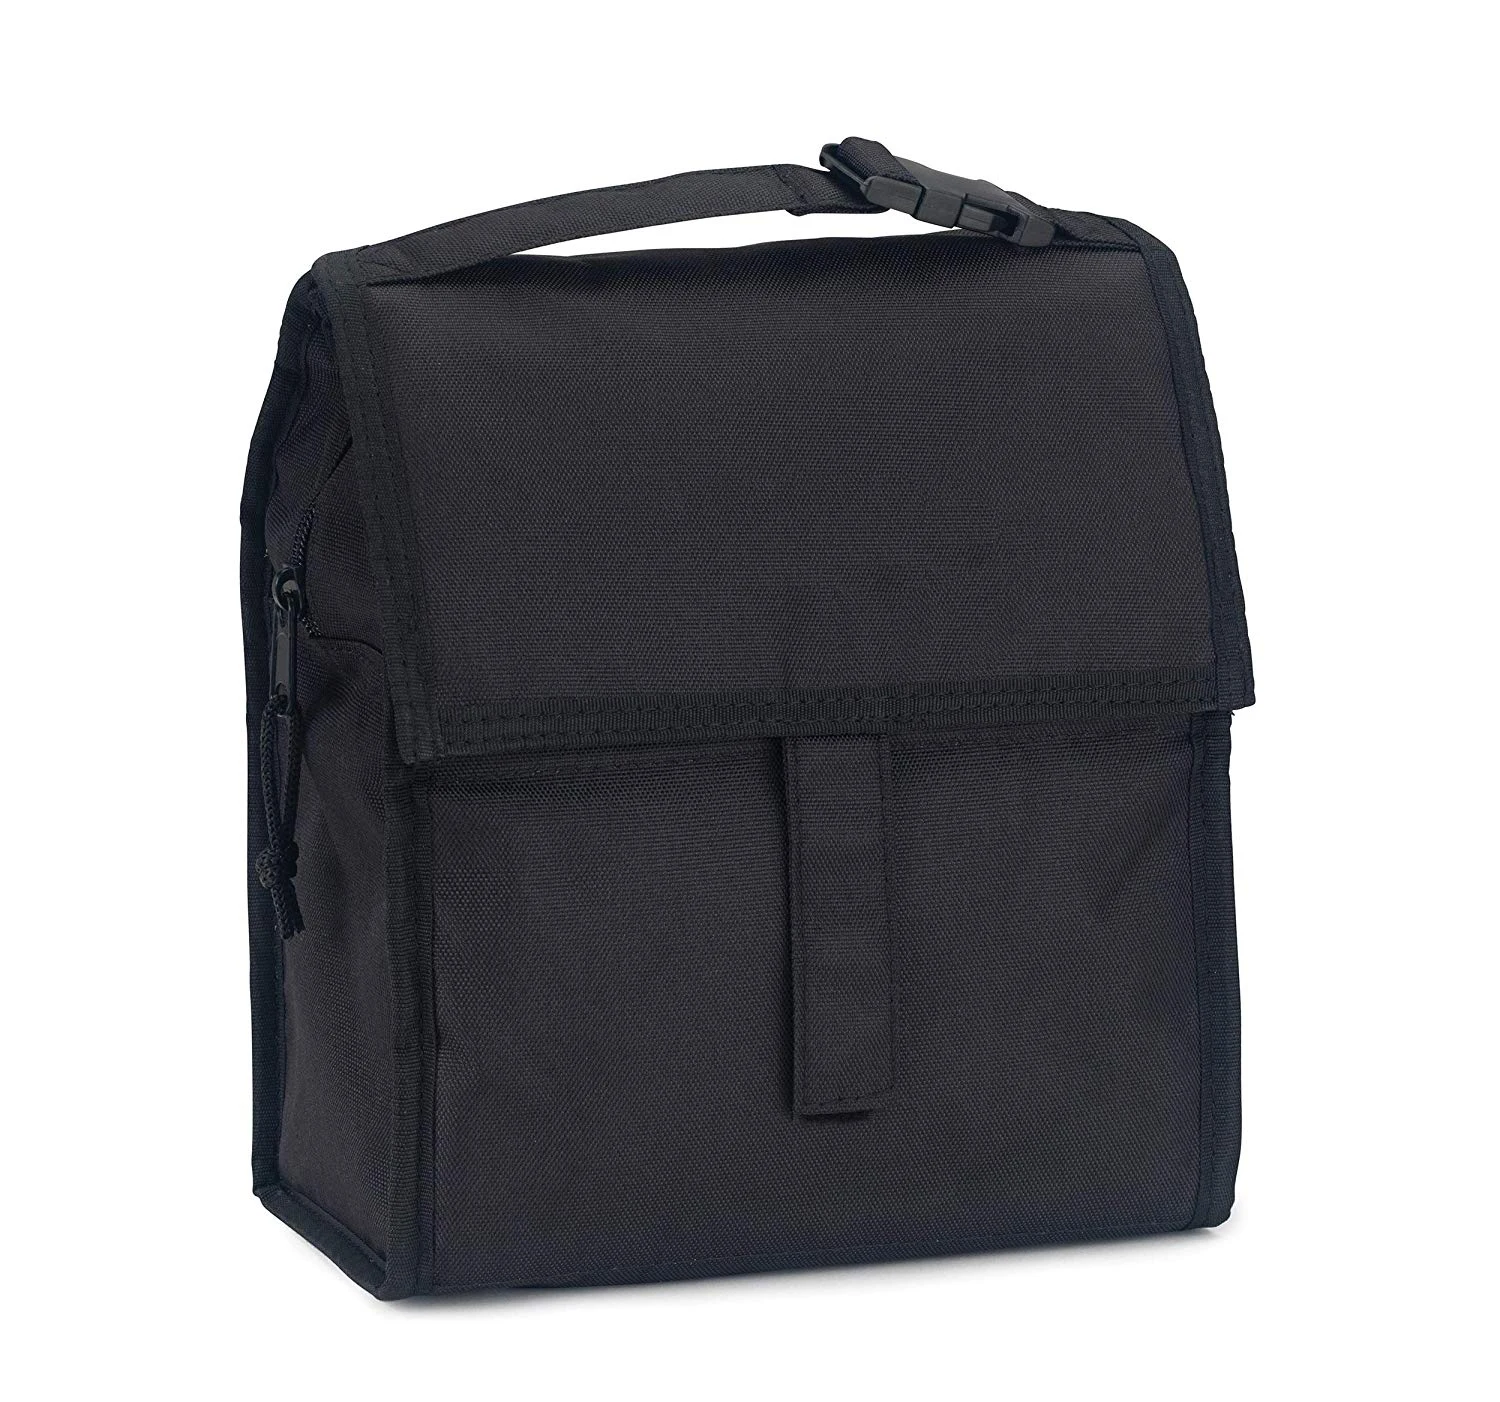 Freezable Men Lunch Cooler Bag with Zip Closure and Food-safe